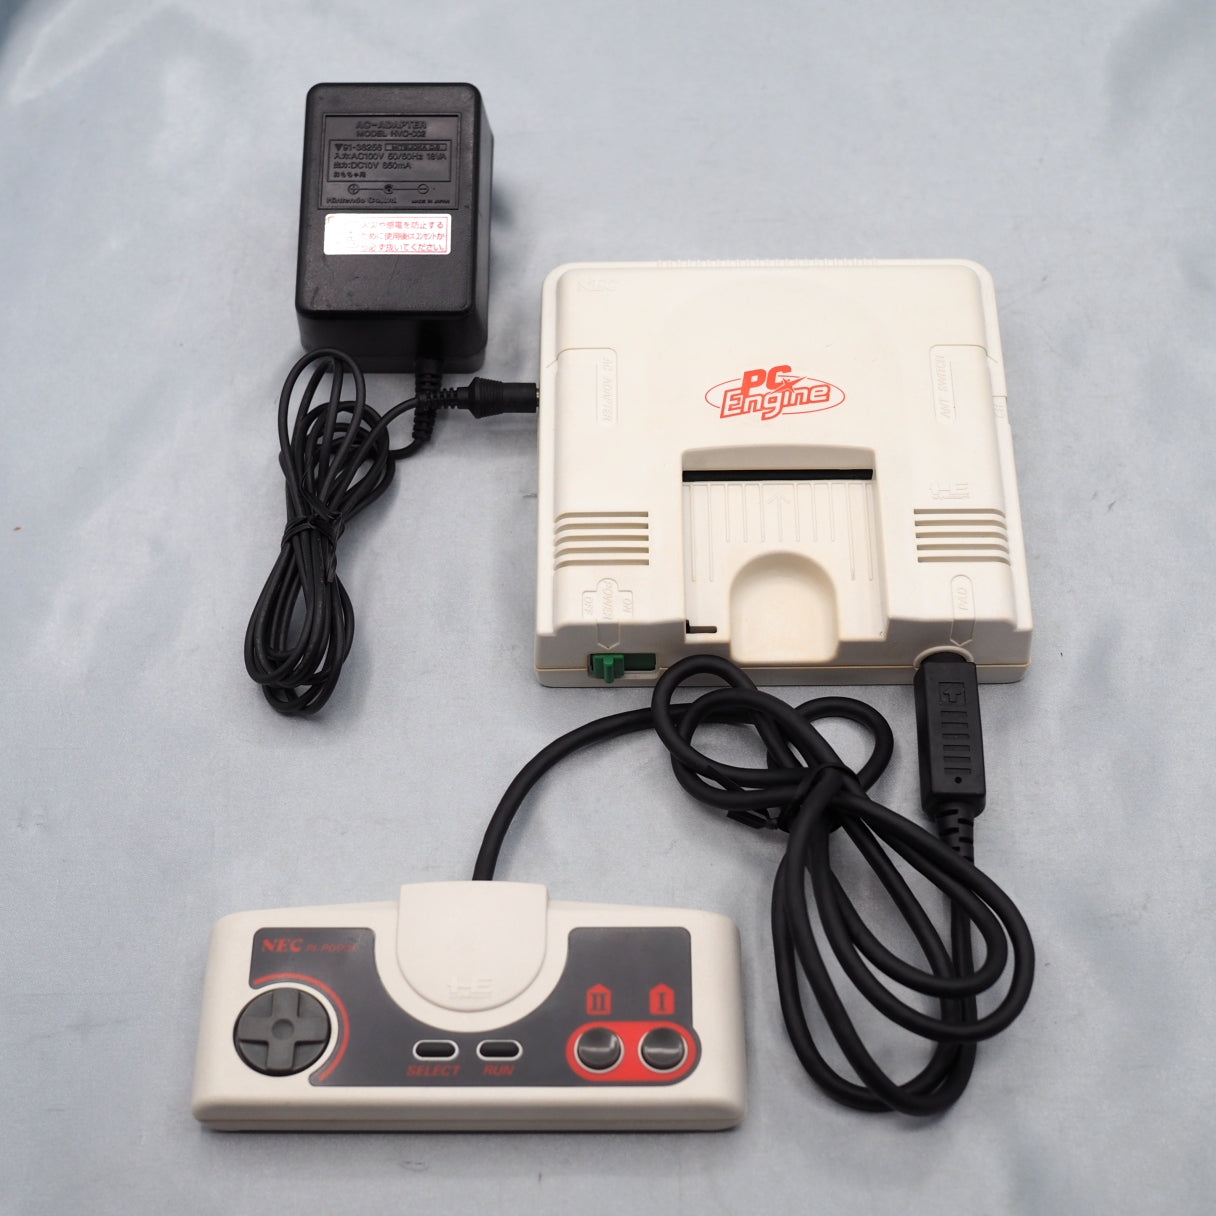 PC Engine Console system PI-TG001